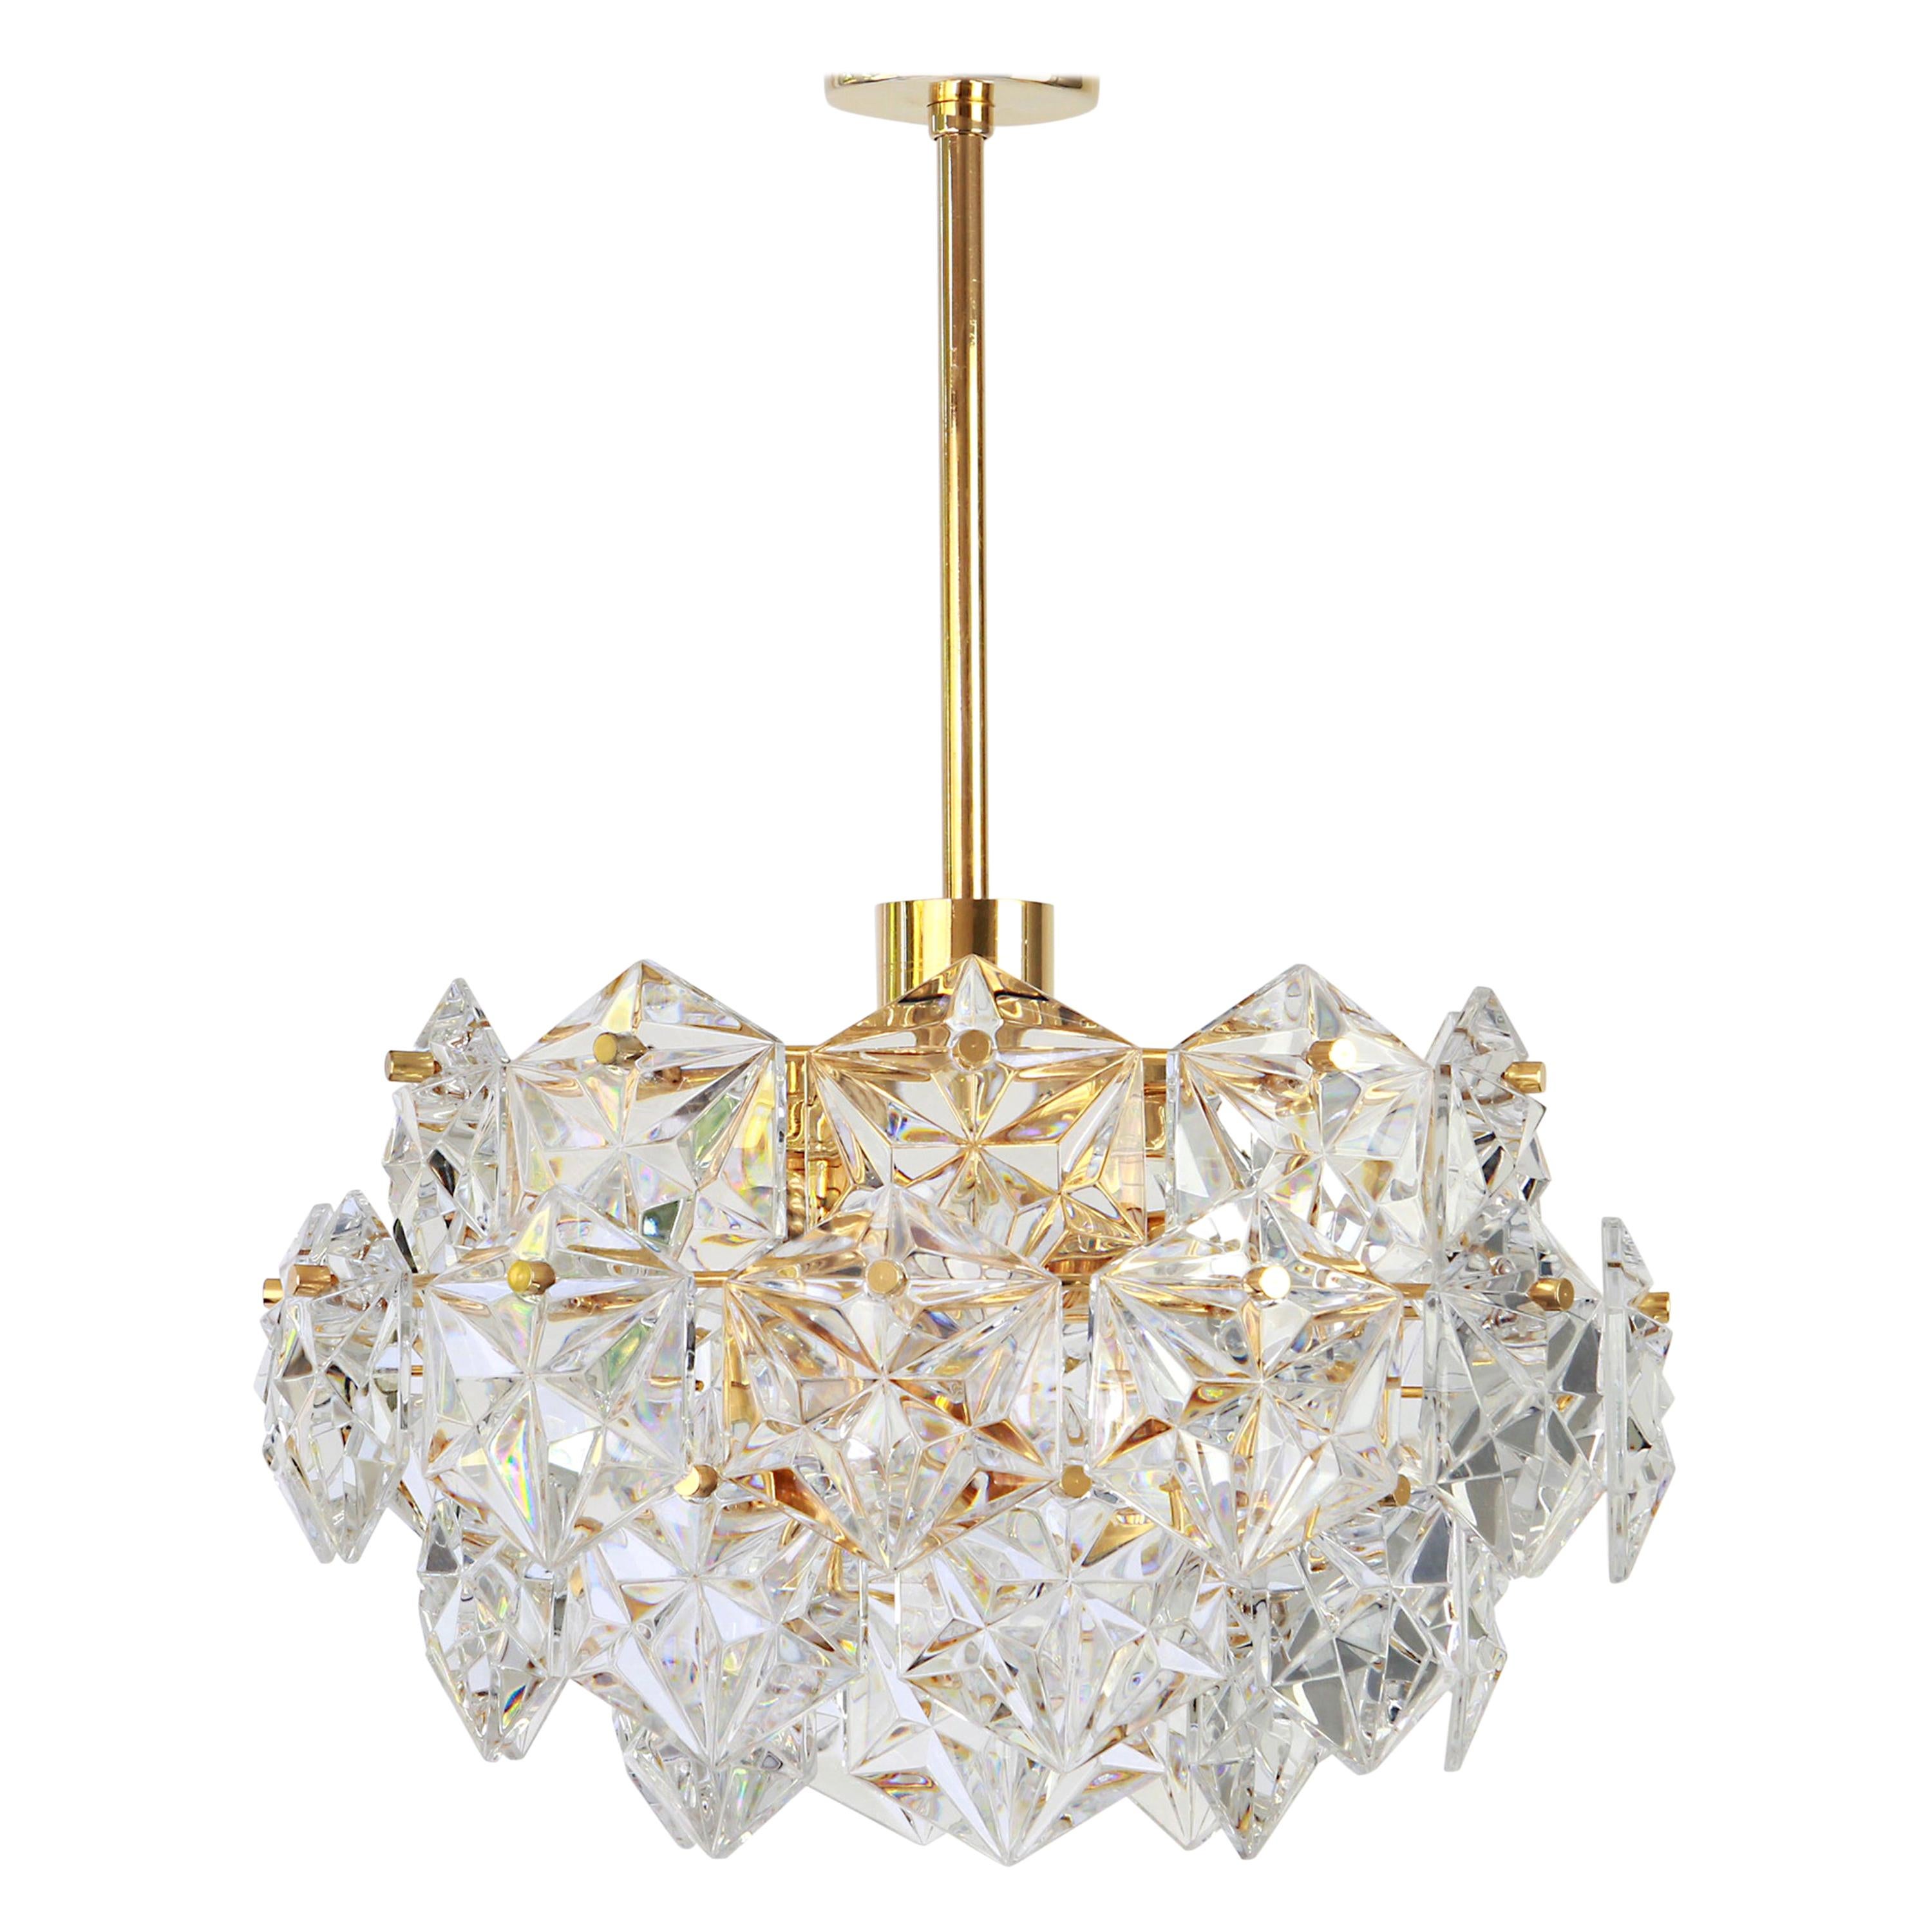 1 of 2 Stunning Chandelier, Brass and Crystal Glass by Kinkeldey, Germany, 1970 For Sale